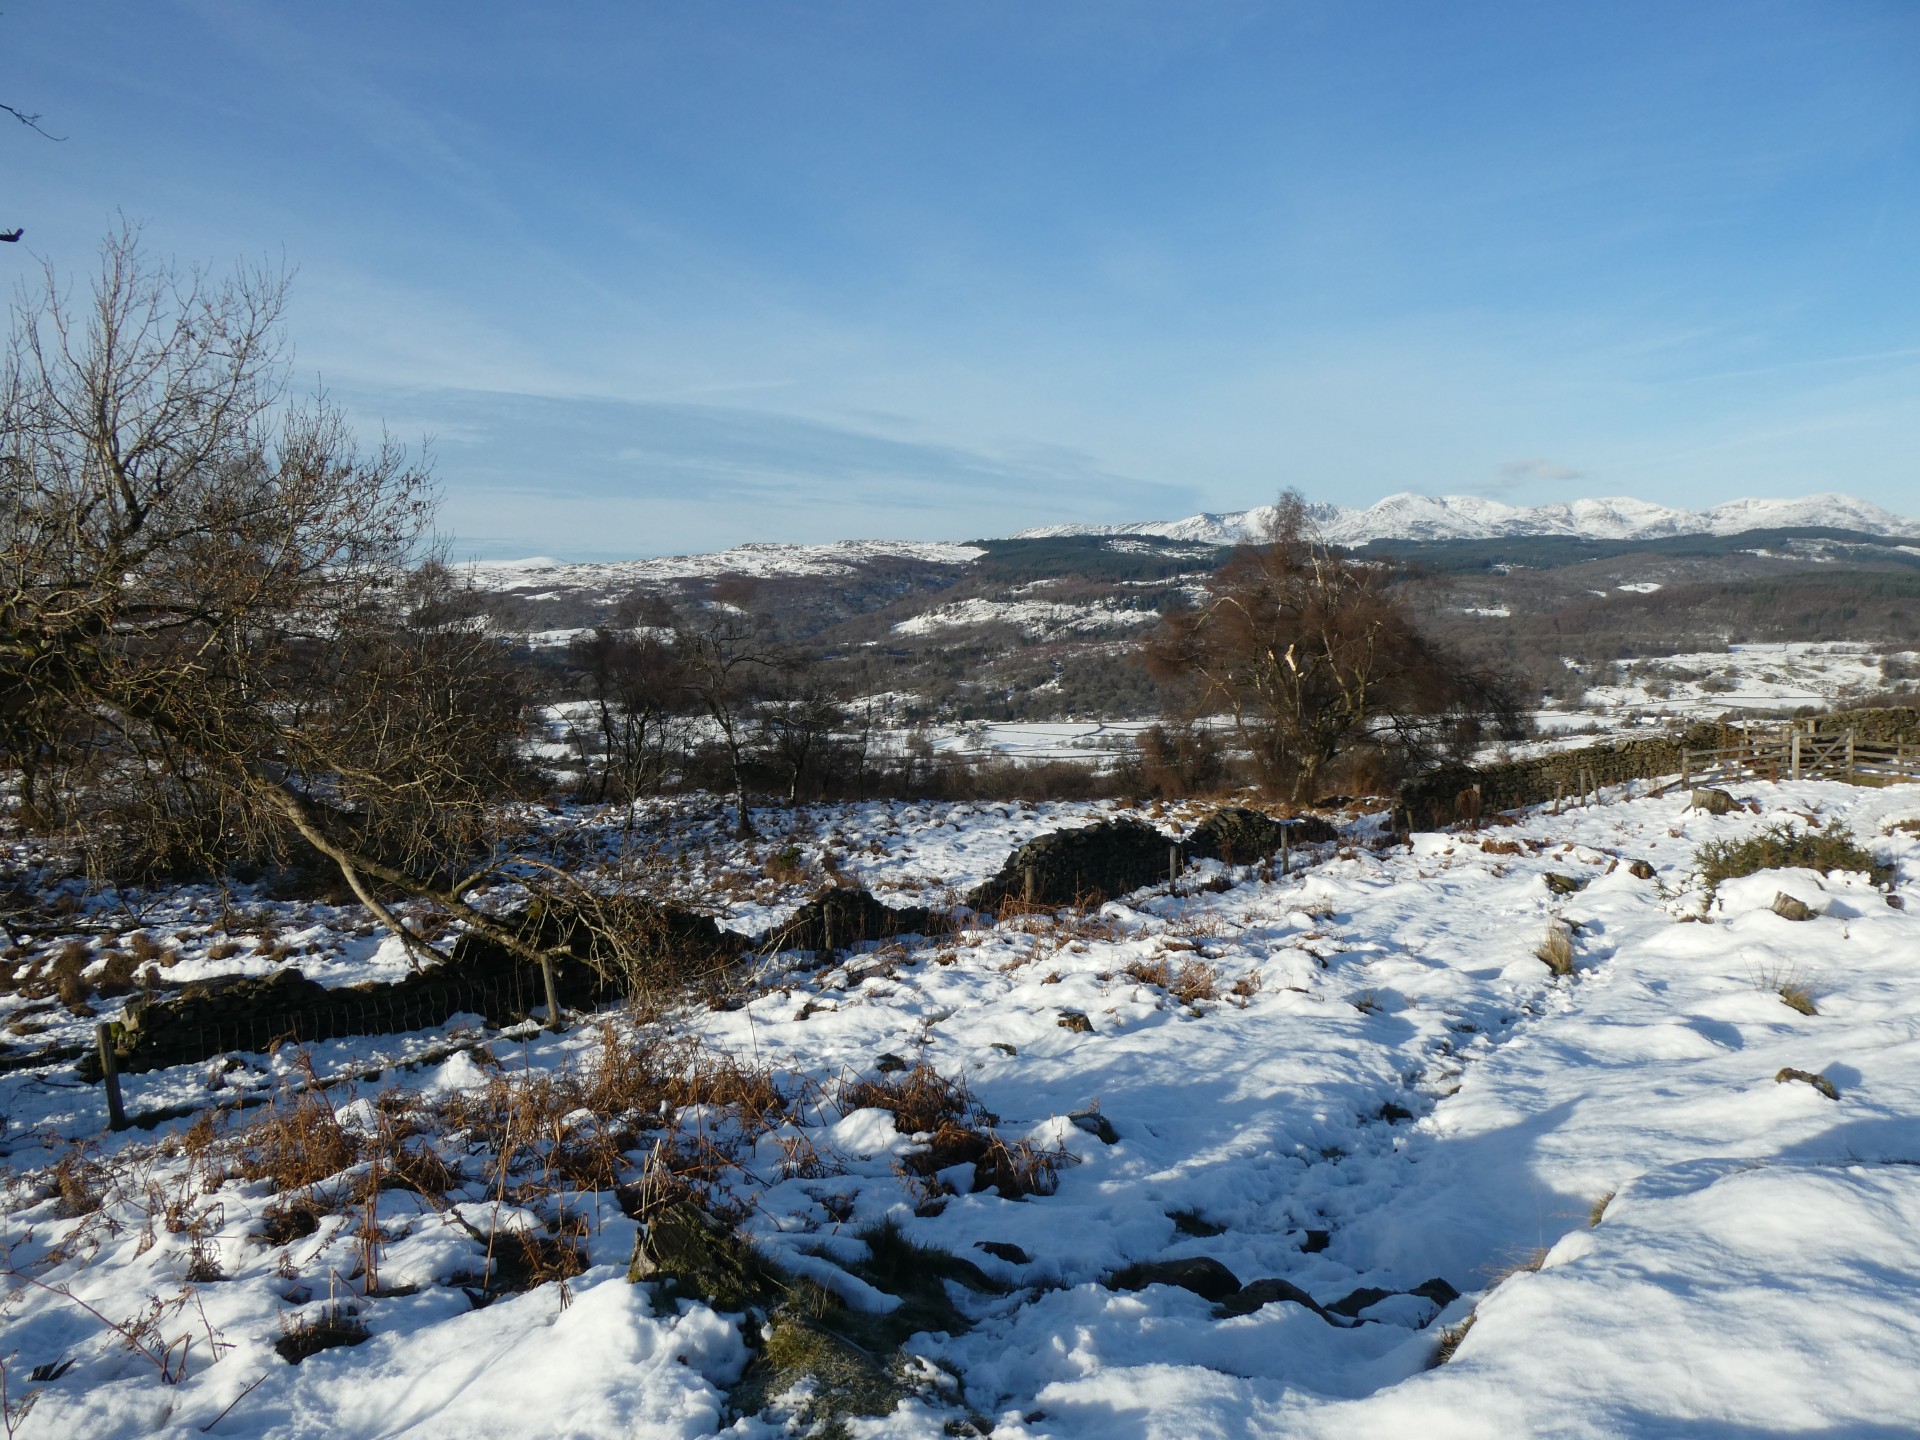 View to Snowy Coniston Fells